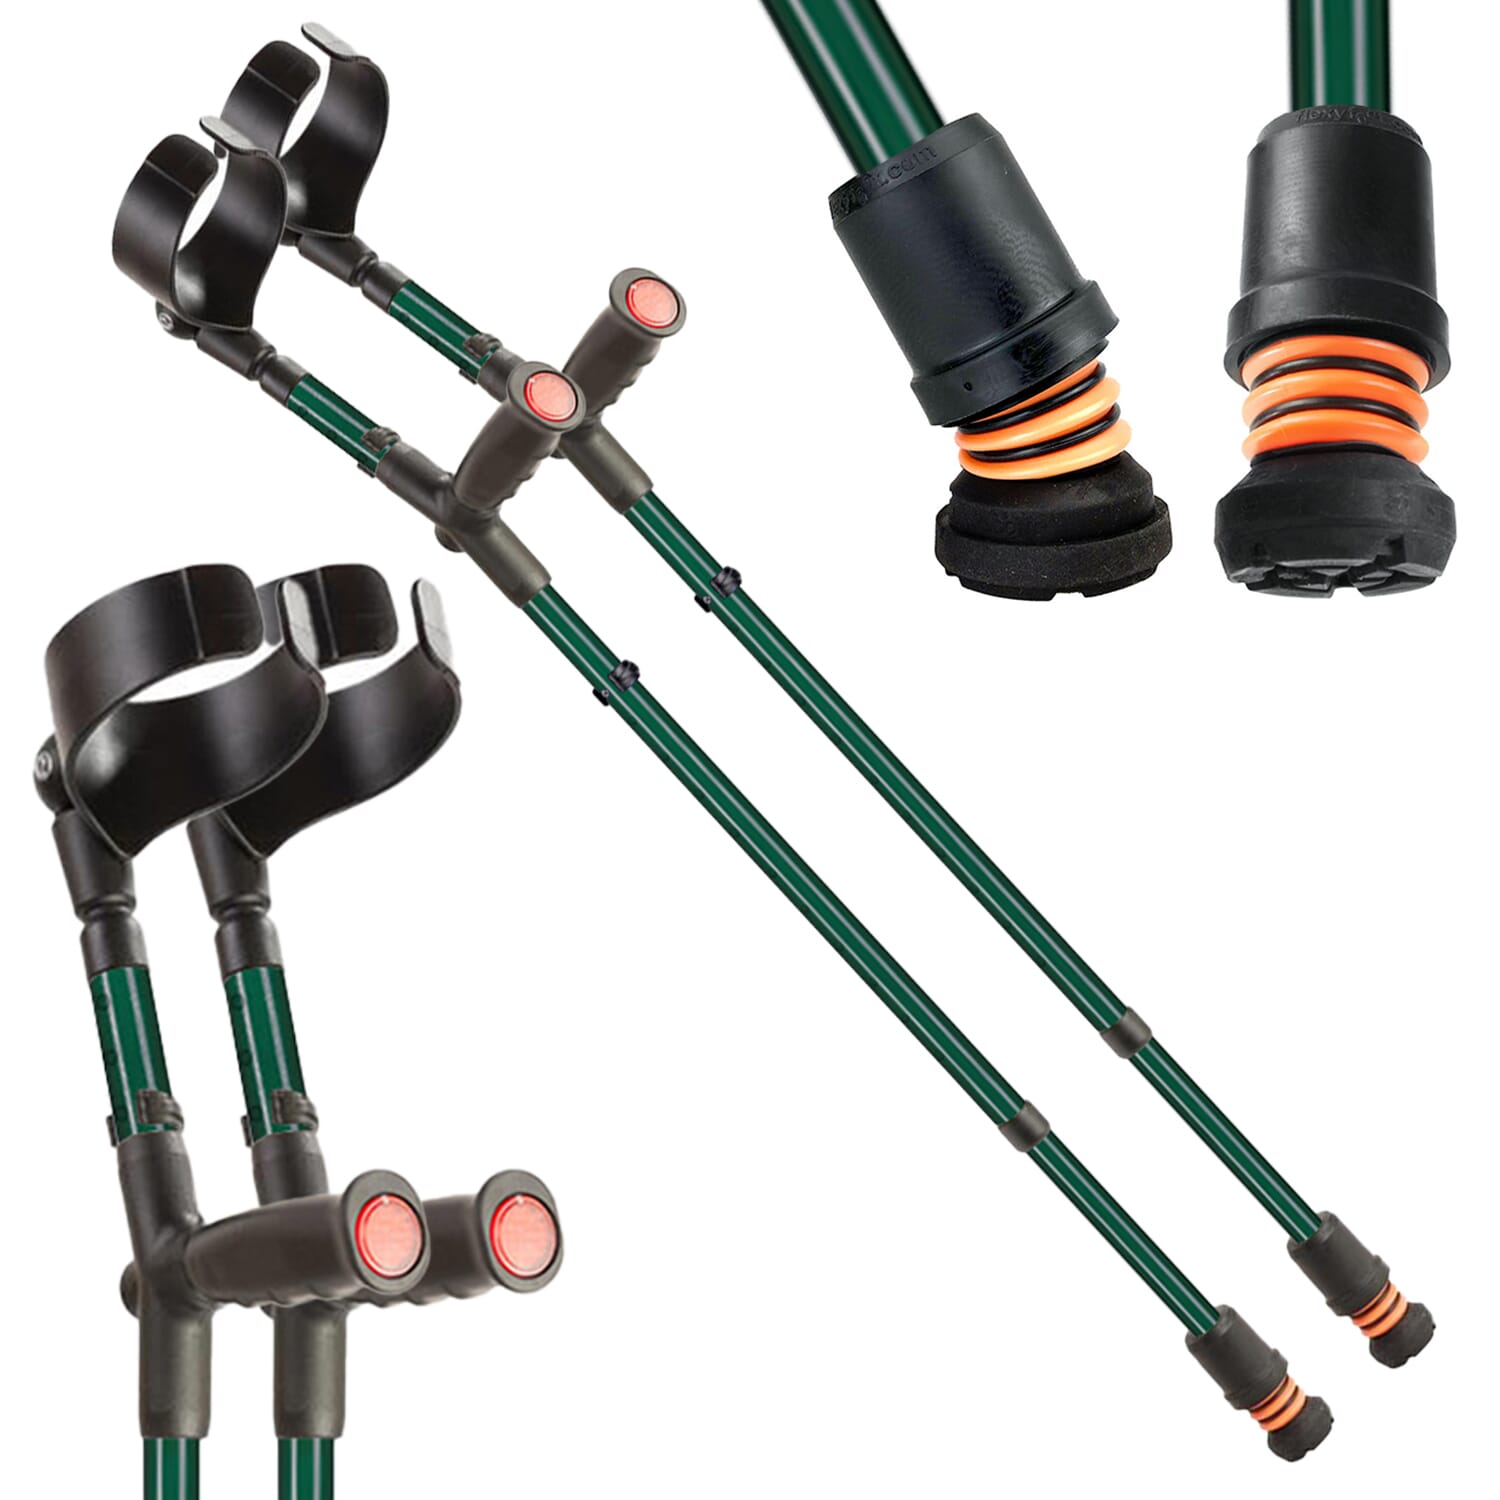 View Flexyfoot Soft Grip Double Adjustable Crutches British Racing Green Pair information